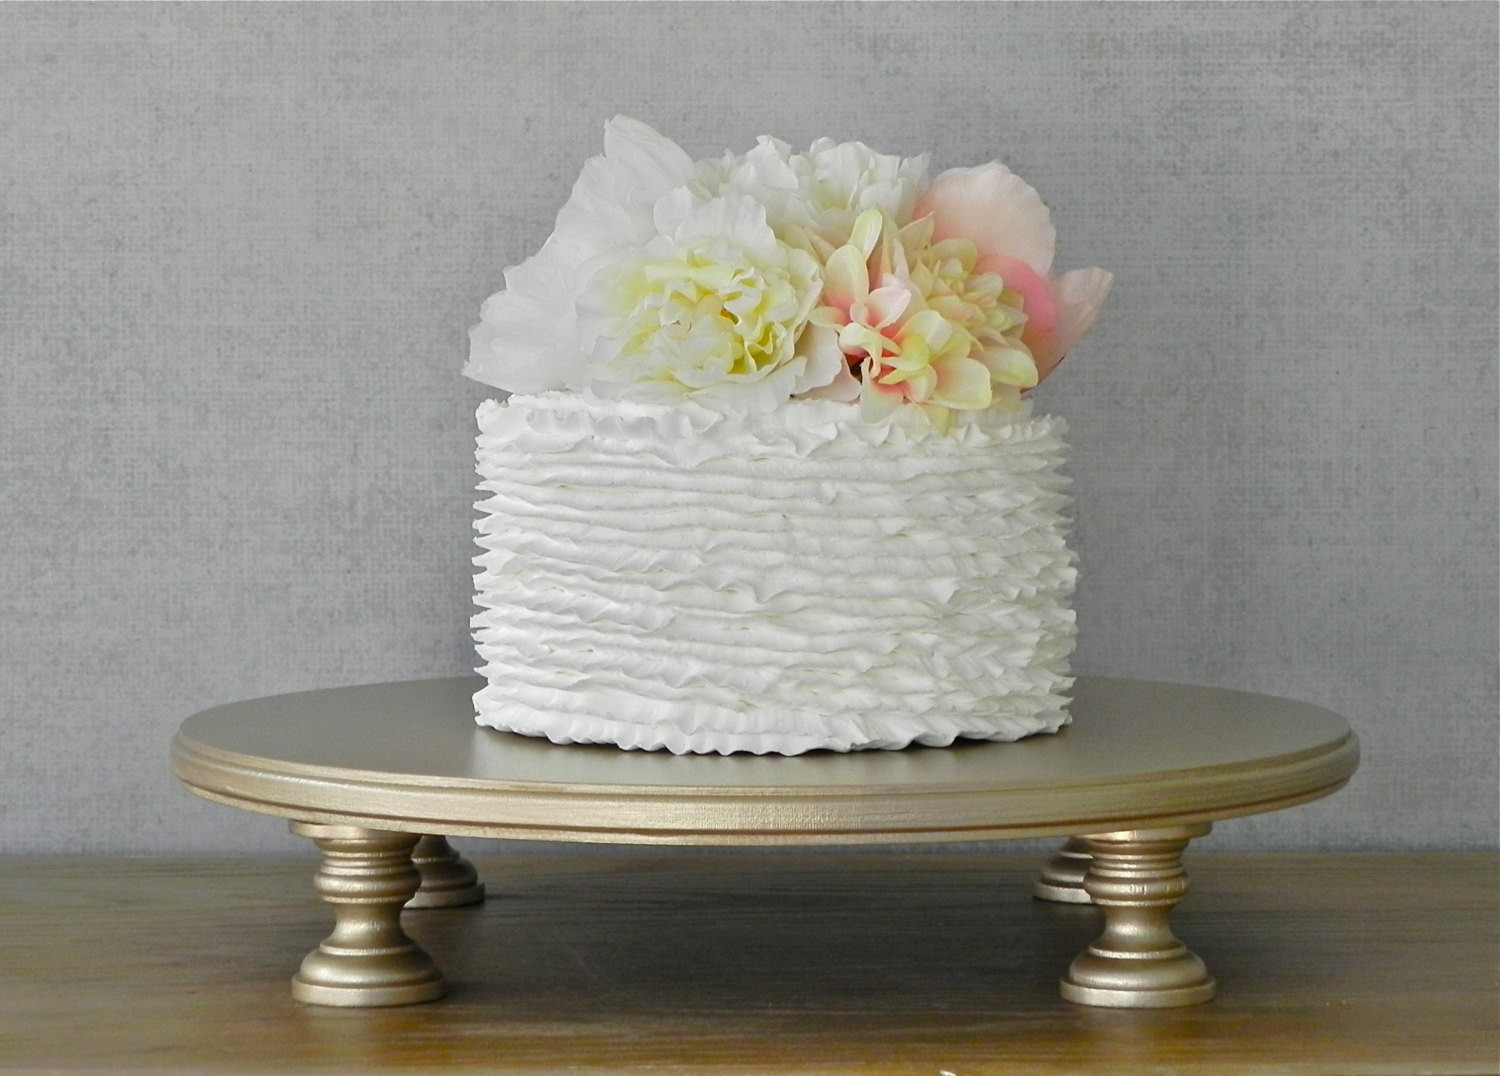 Round Cake Stands For Wedding Cakes
 18 Cake Stand Wedding Champagne Round Cupcake Grooms